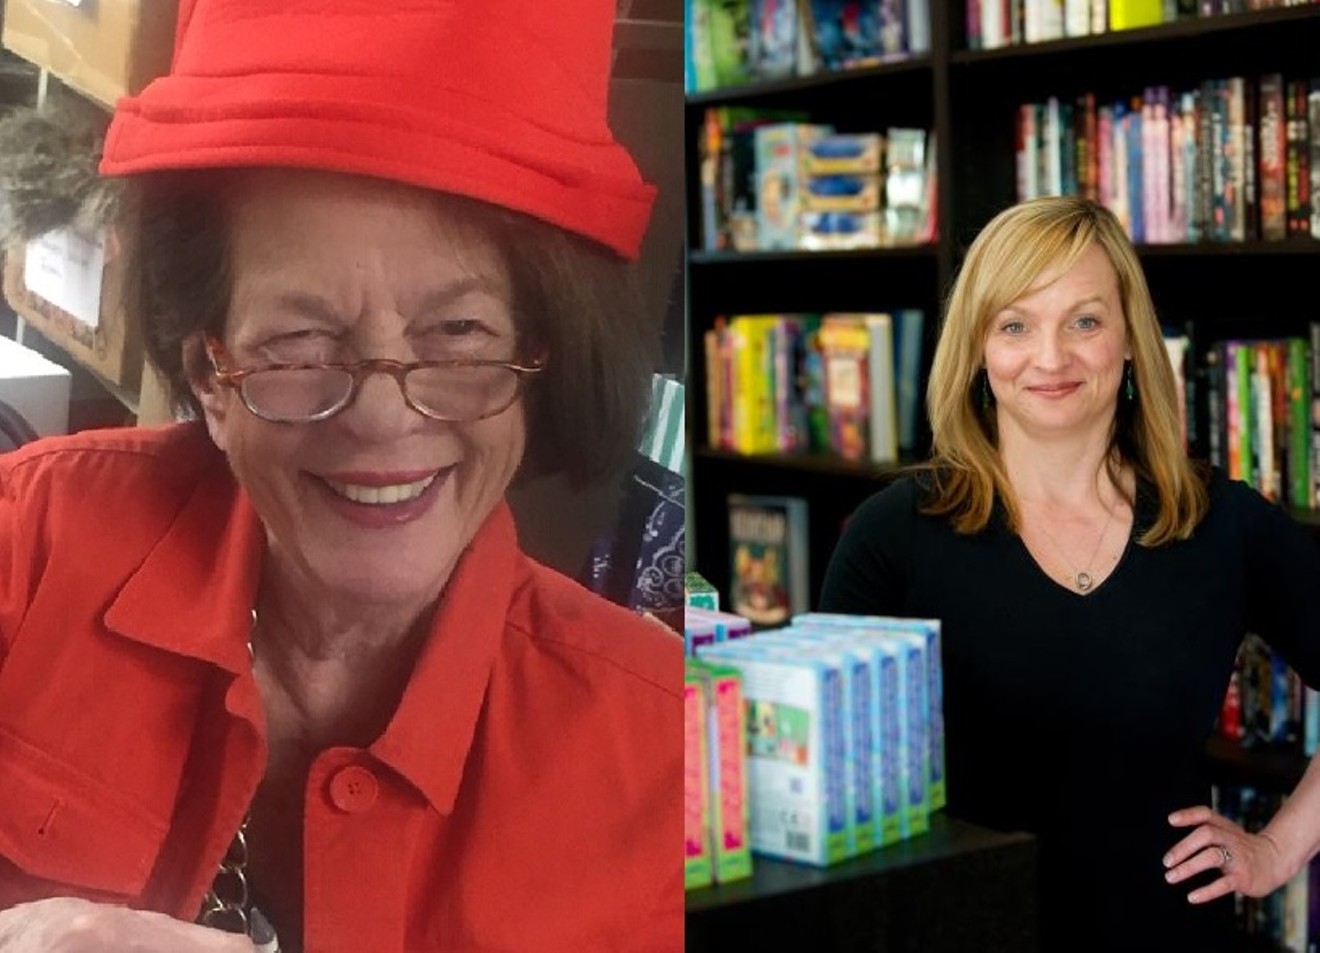 Sue Lubeck's Bookies legacy will carry on with the help of BookBar's Nicole Sullivan